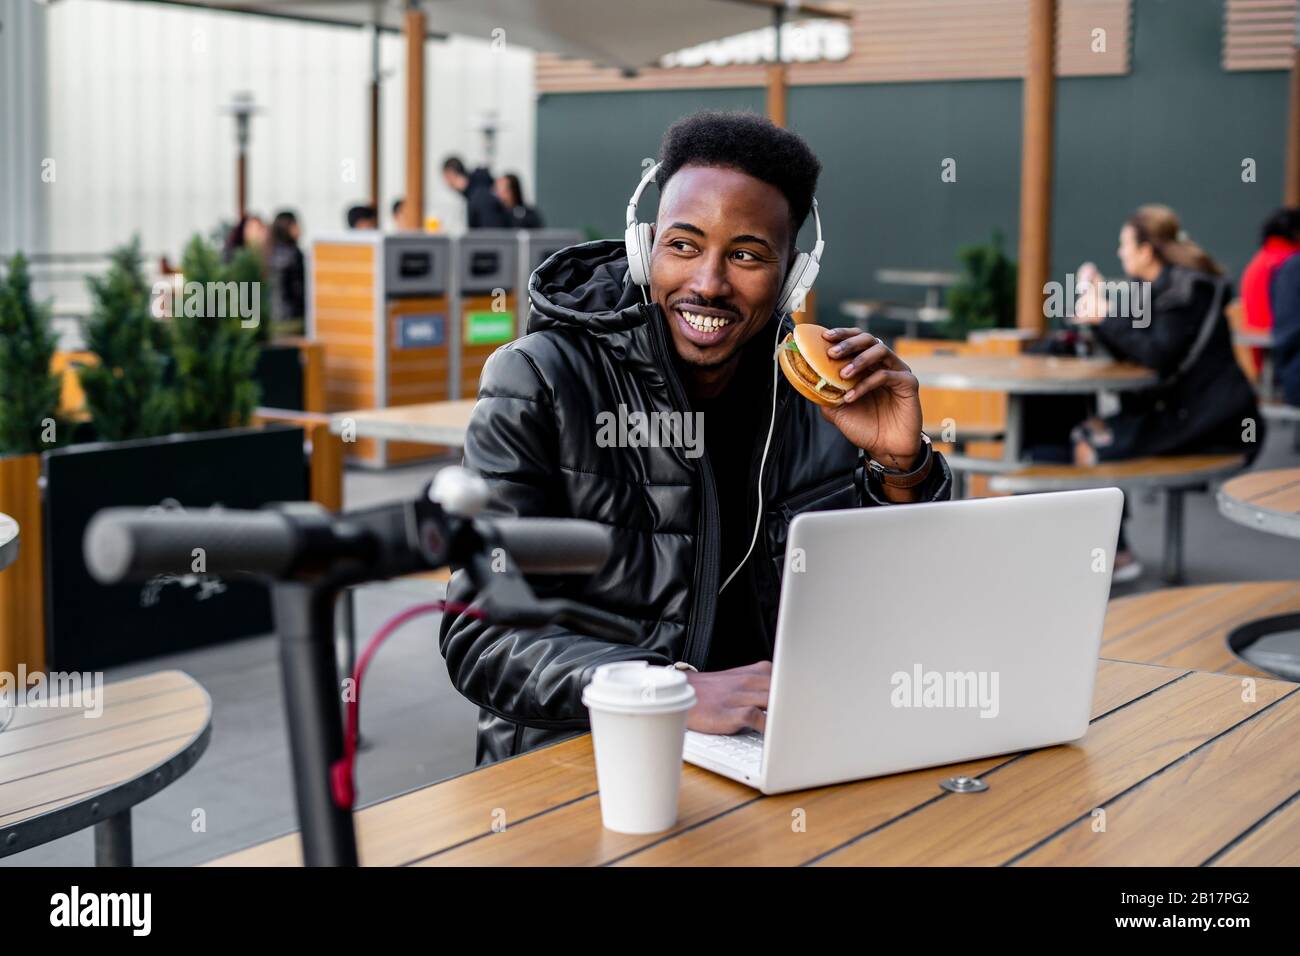 Man using laptop and eating a burger in a cafe Stock Photo